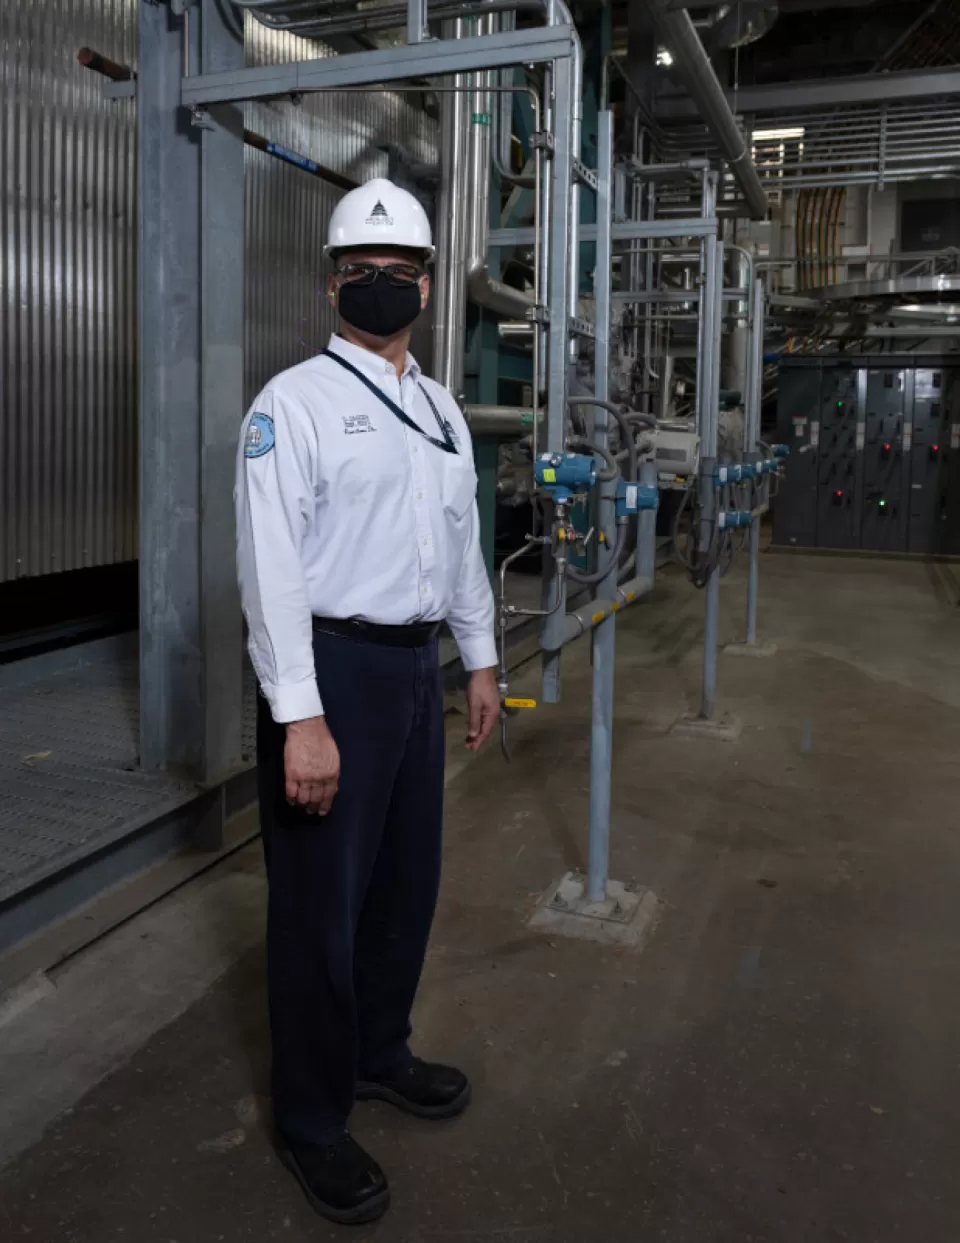 Sequester Team Leader Ladislaus “Dave” Jagoda in front of the cogeneration system at the Capitol Power Plant